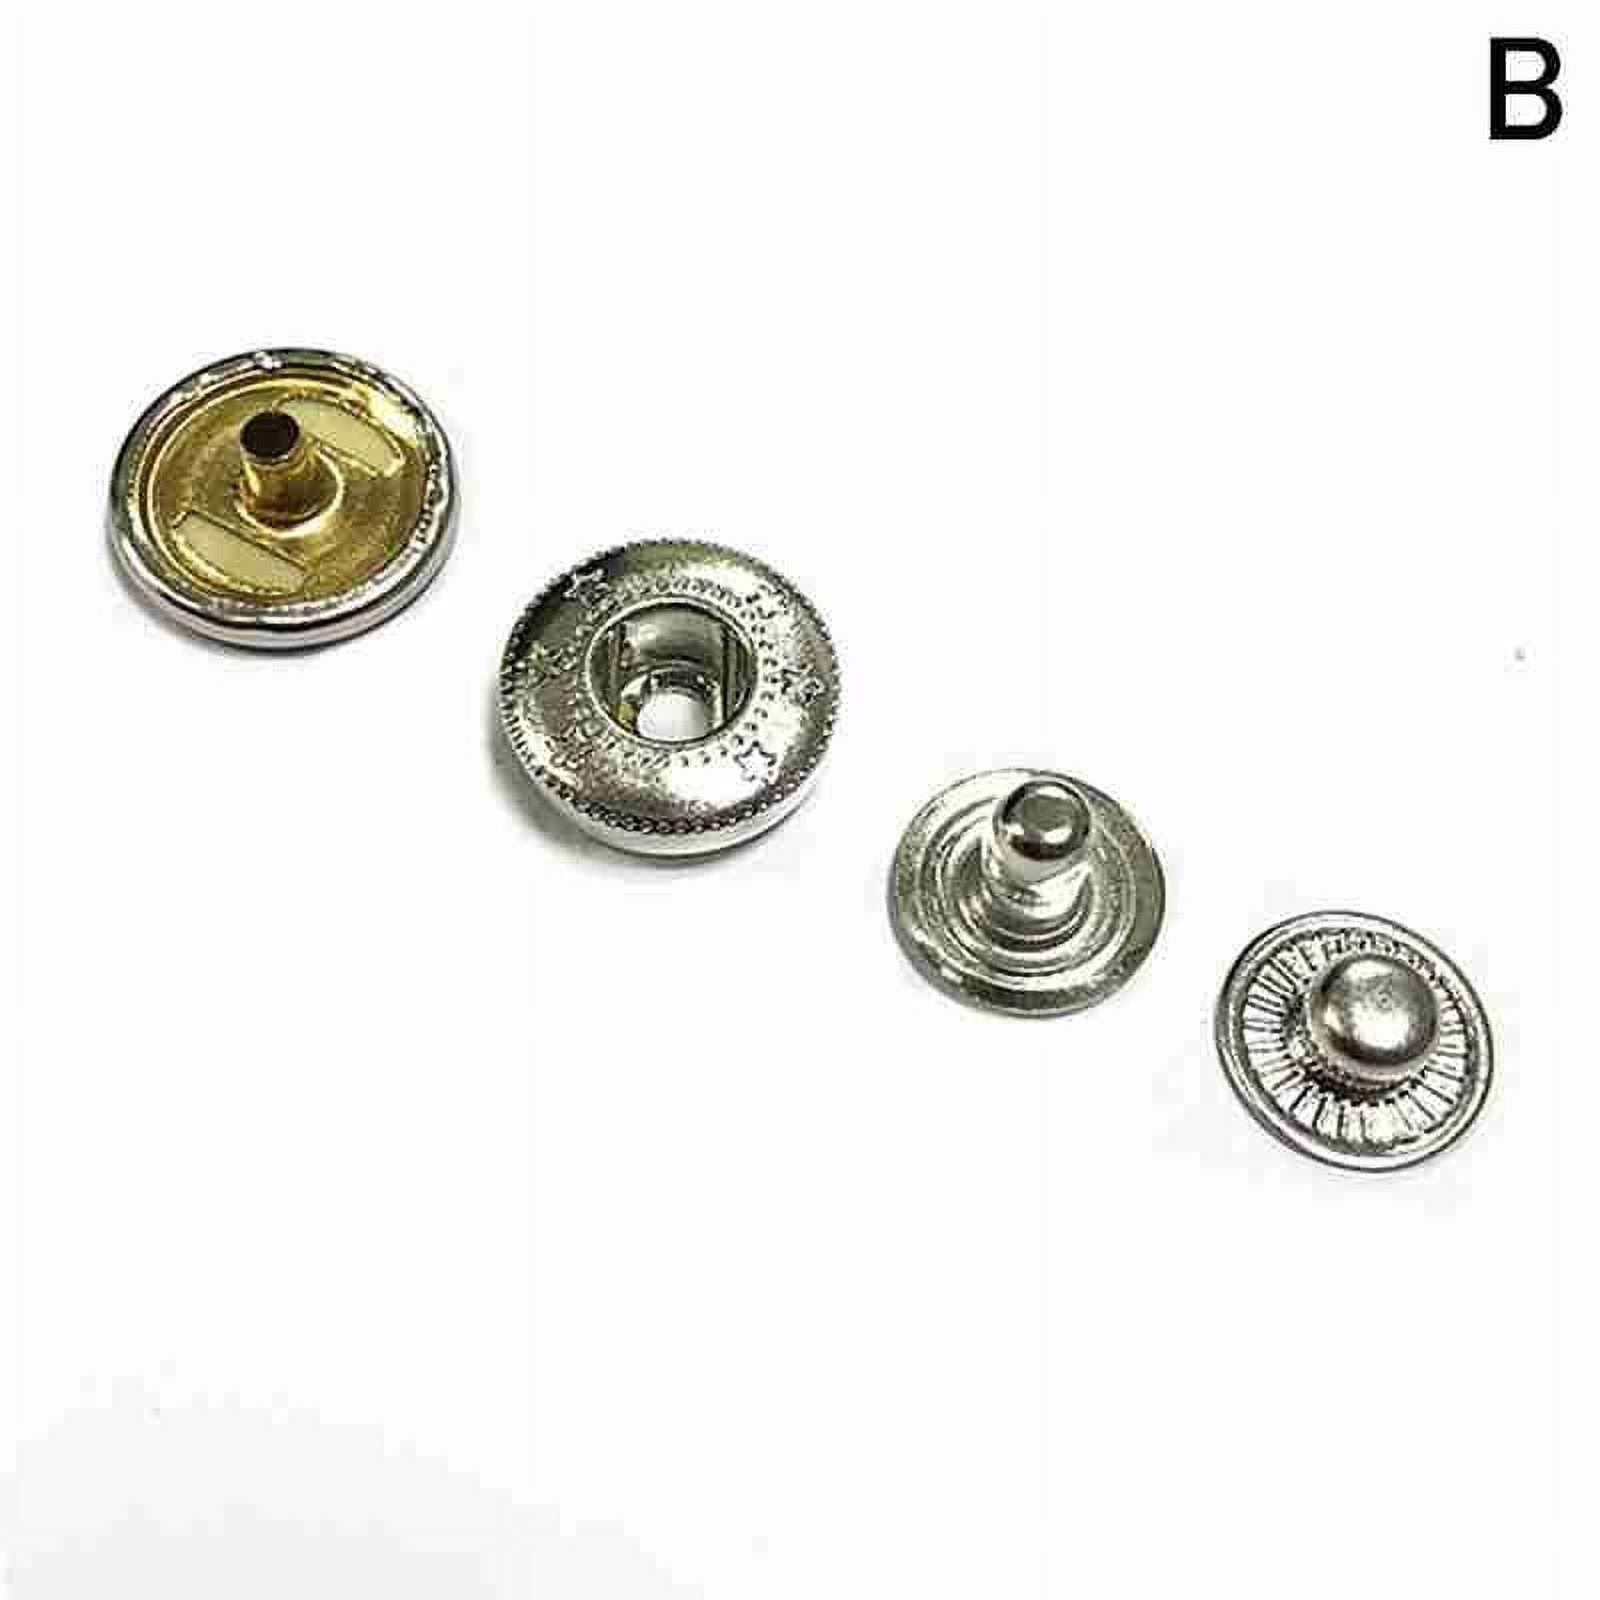 How to rivet snap fasteners (snap buttons)